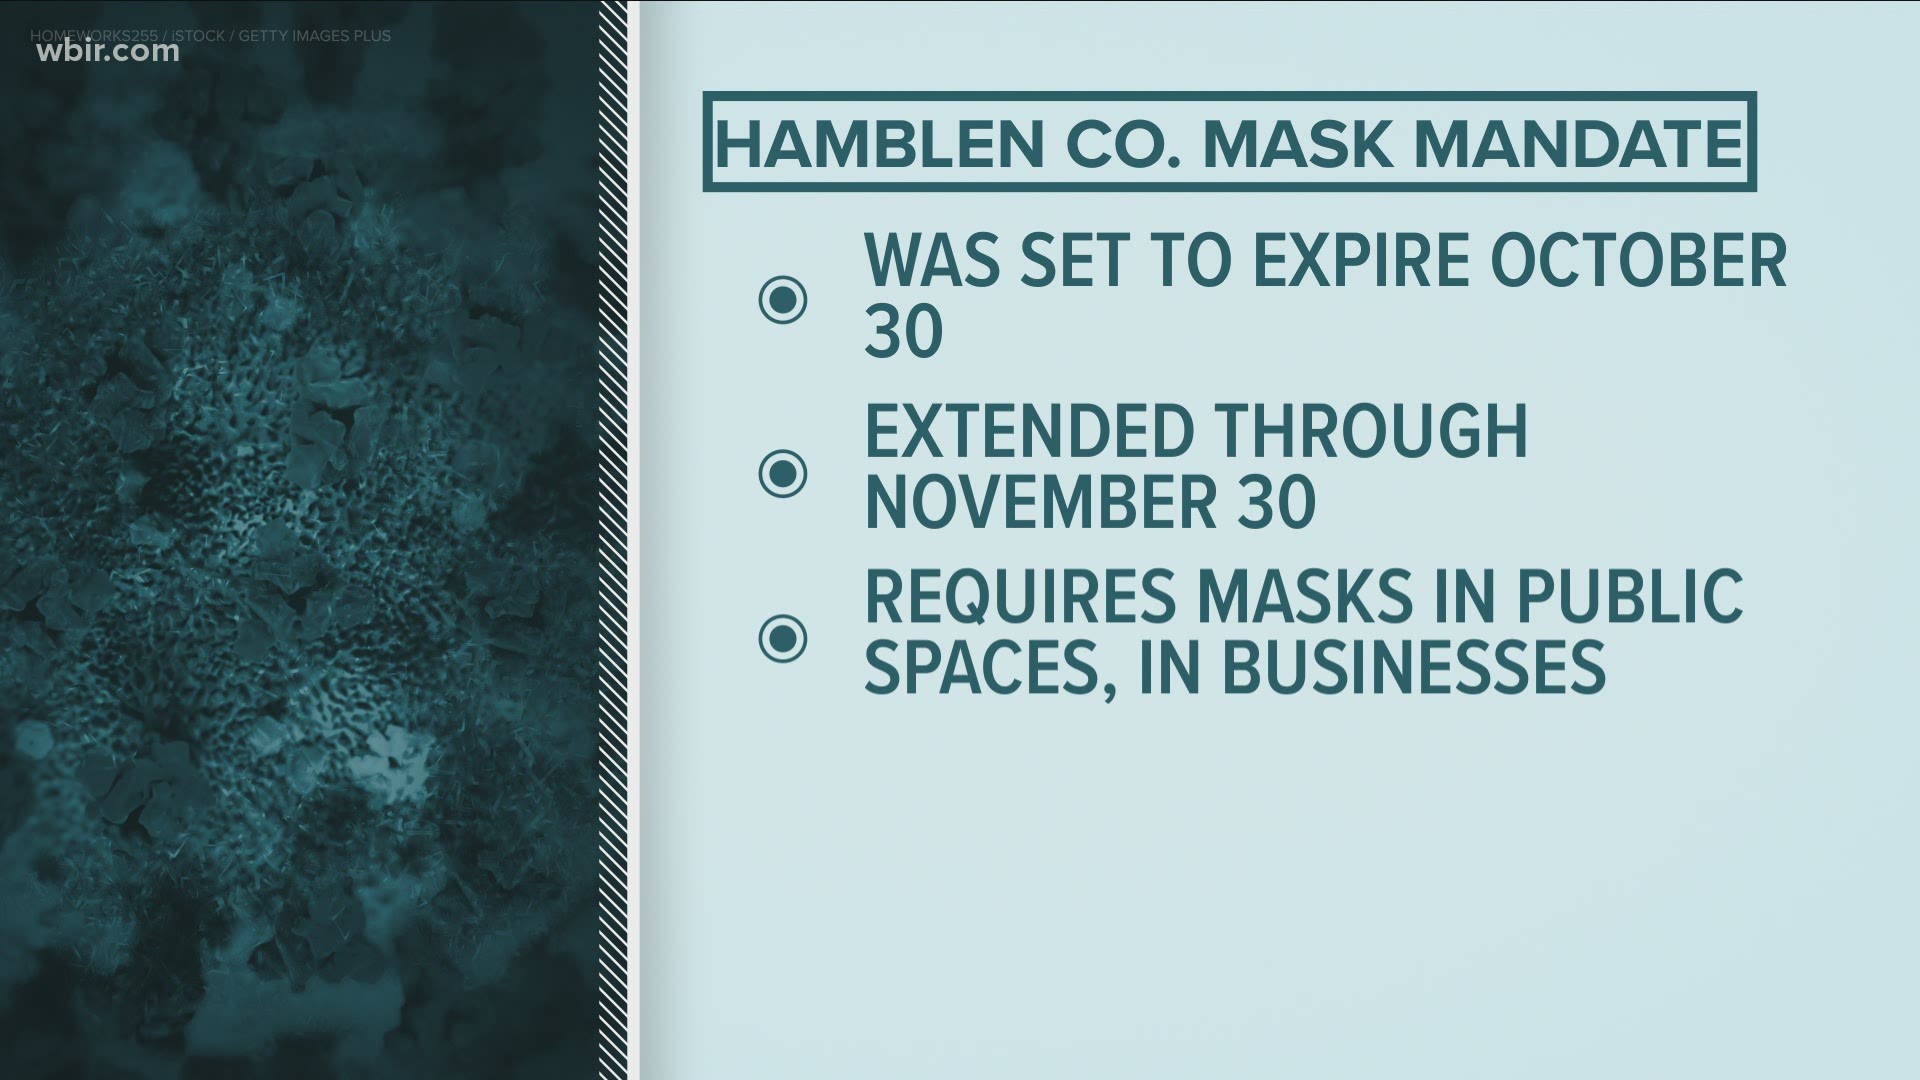 It's now extended through November 30 at midnight. It requires people to wear masks in public spaces and in businesses.